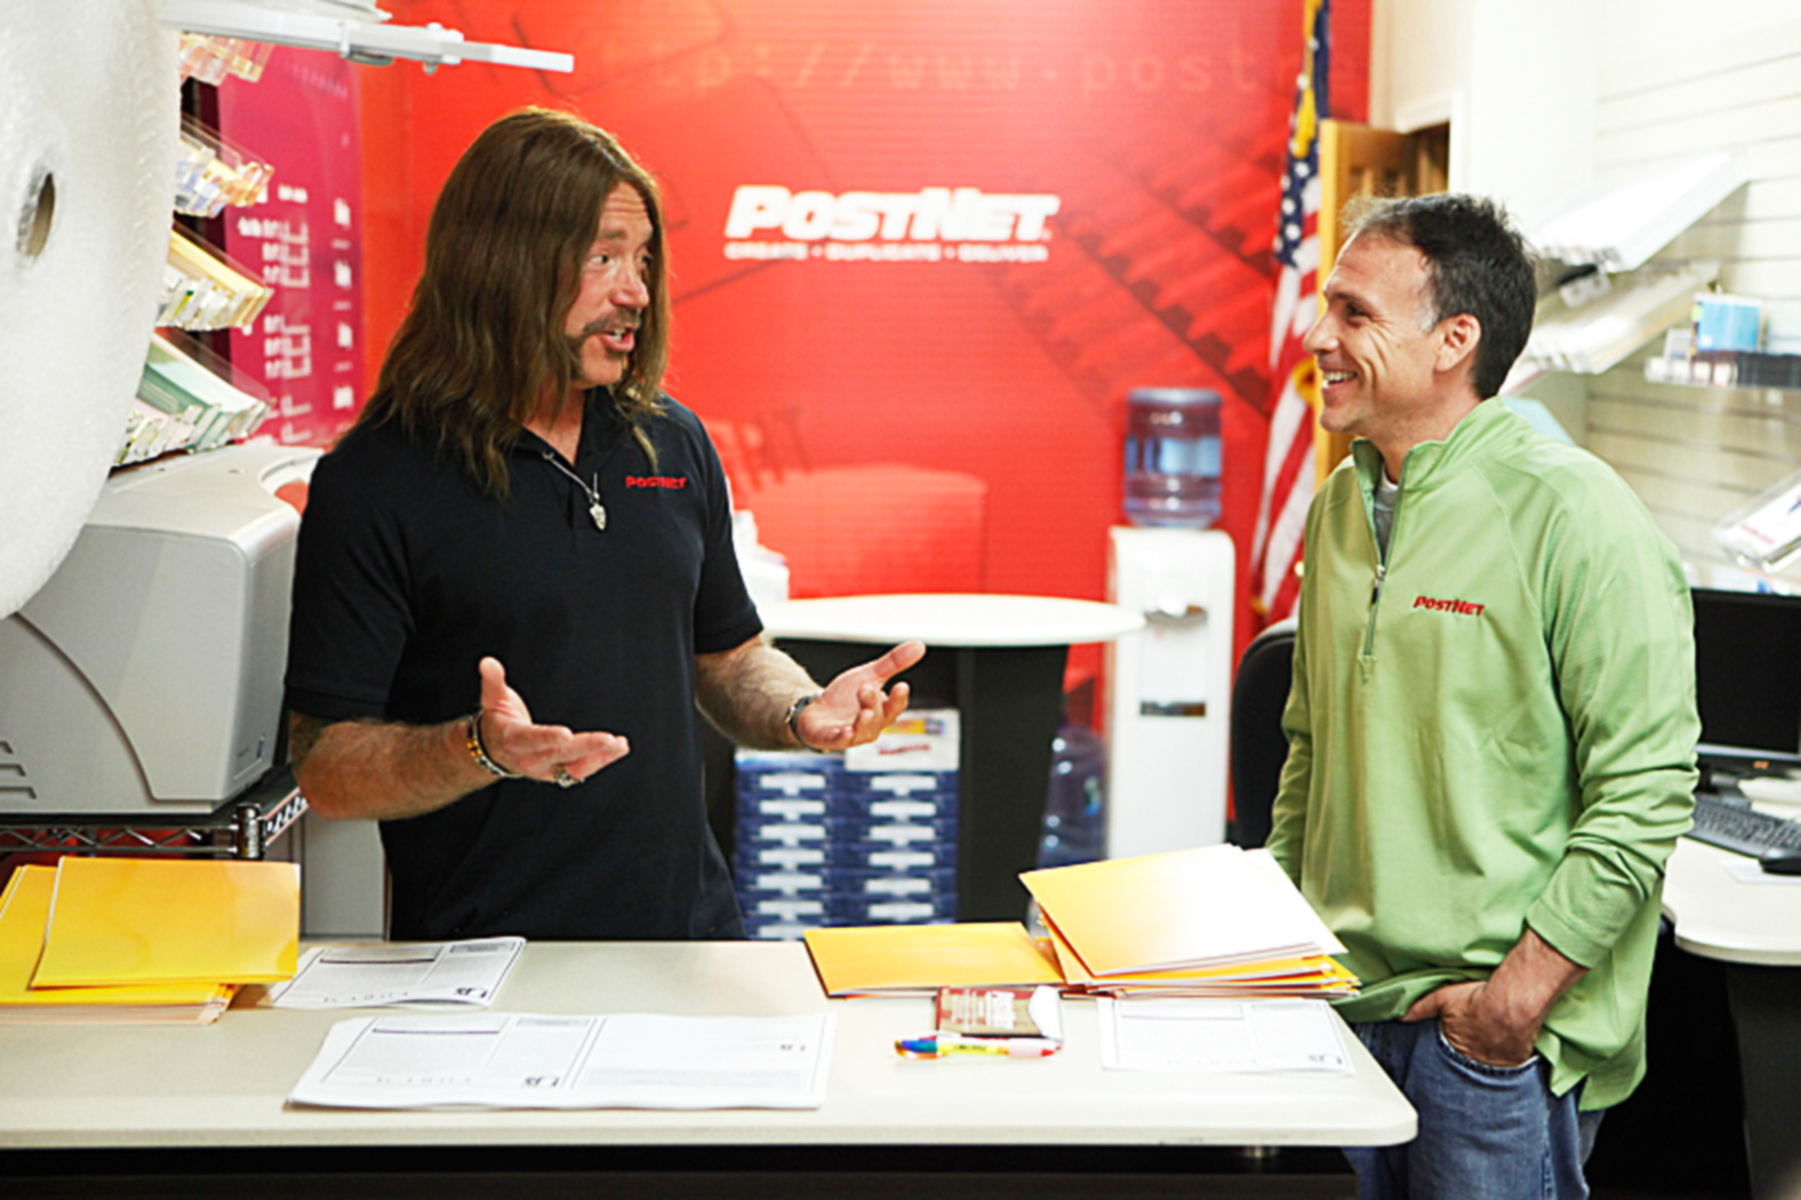 Two people conversing in a store with one person gesturing and the other smiling. Both are wearing branded work attire